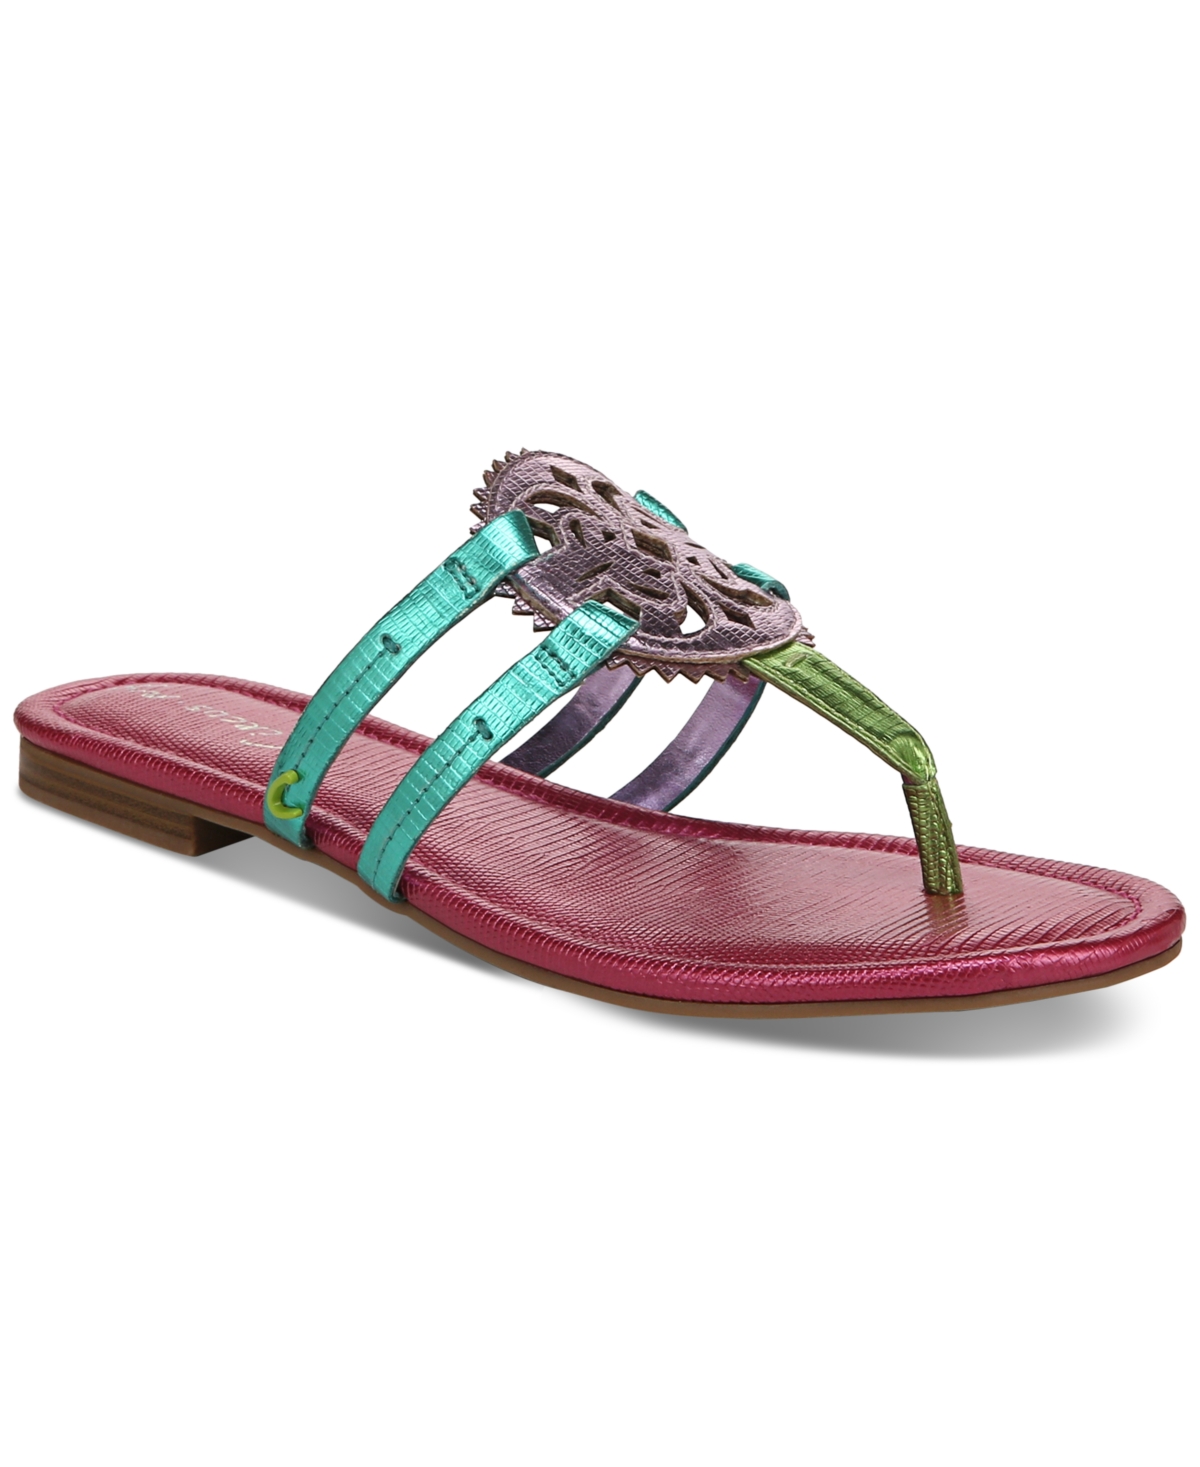 Circus Ny Women's Canyon Medallion Flat Sandals Women's Shoes